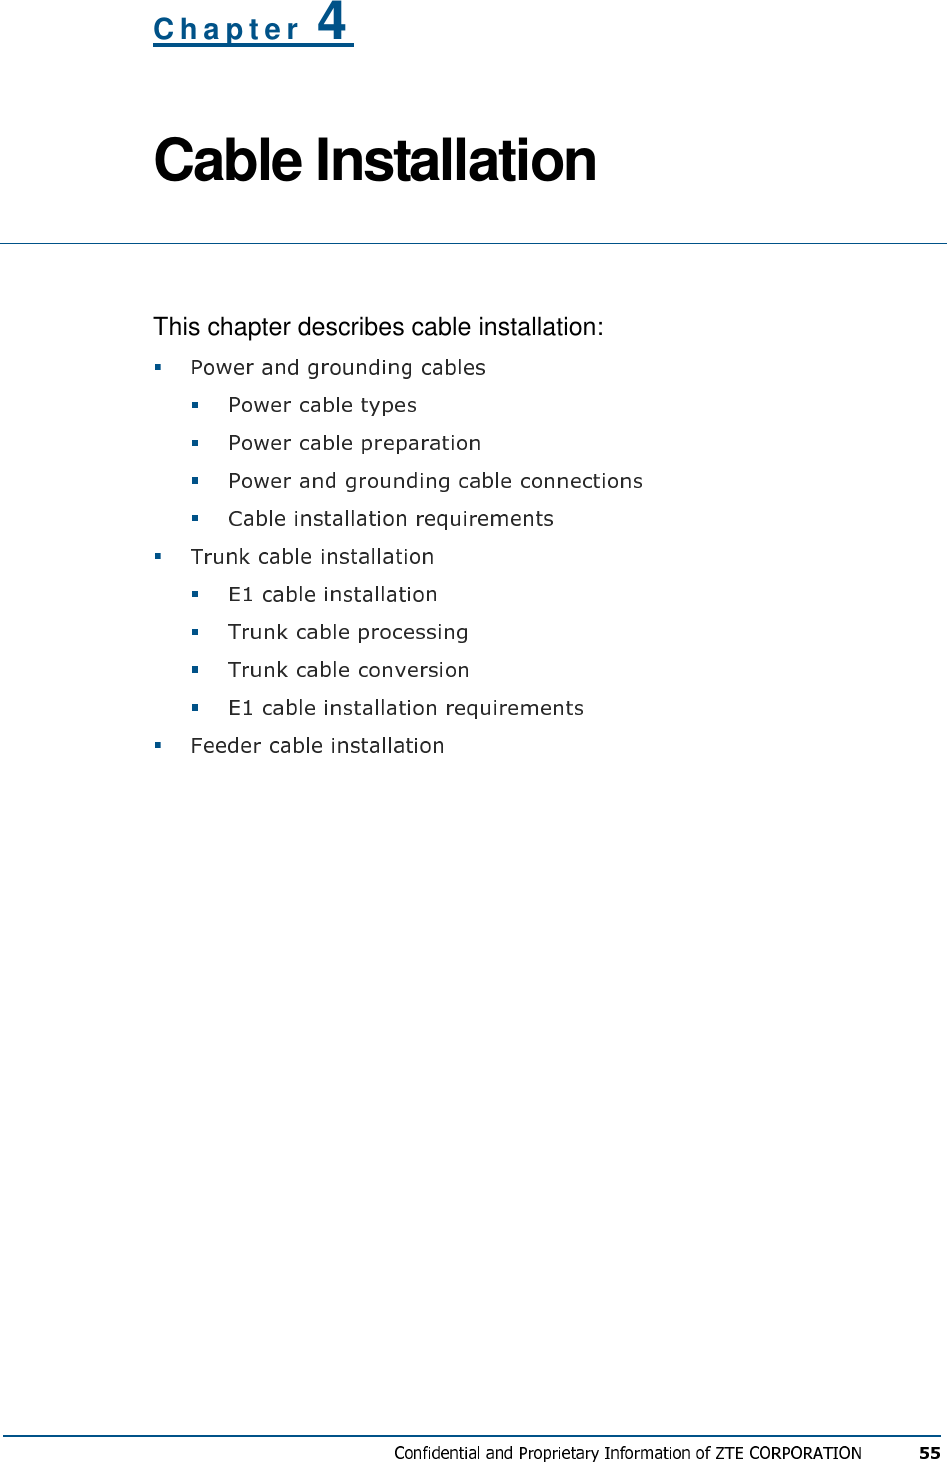 C h a p t e r   4 Cable Installation  This chapter describes cable installation:            